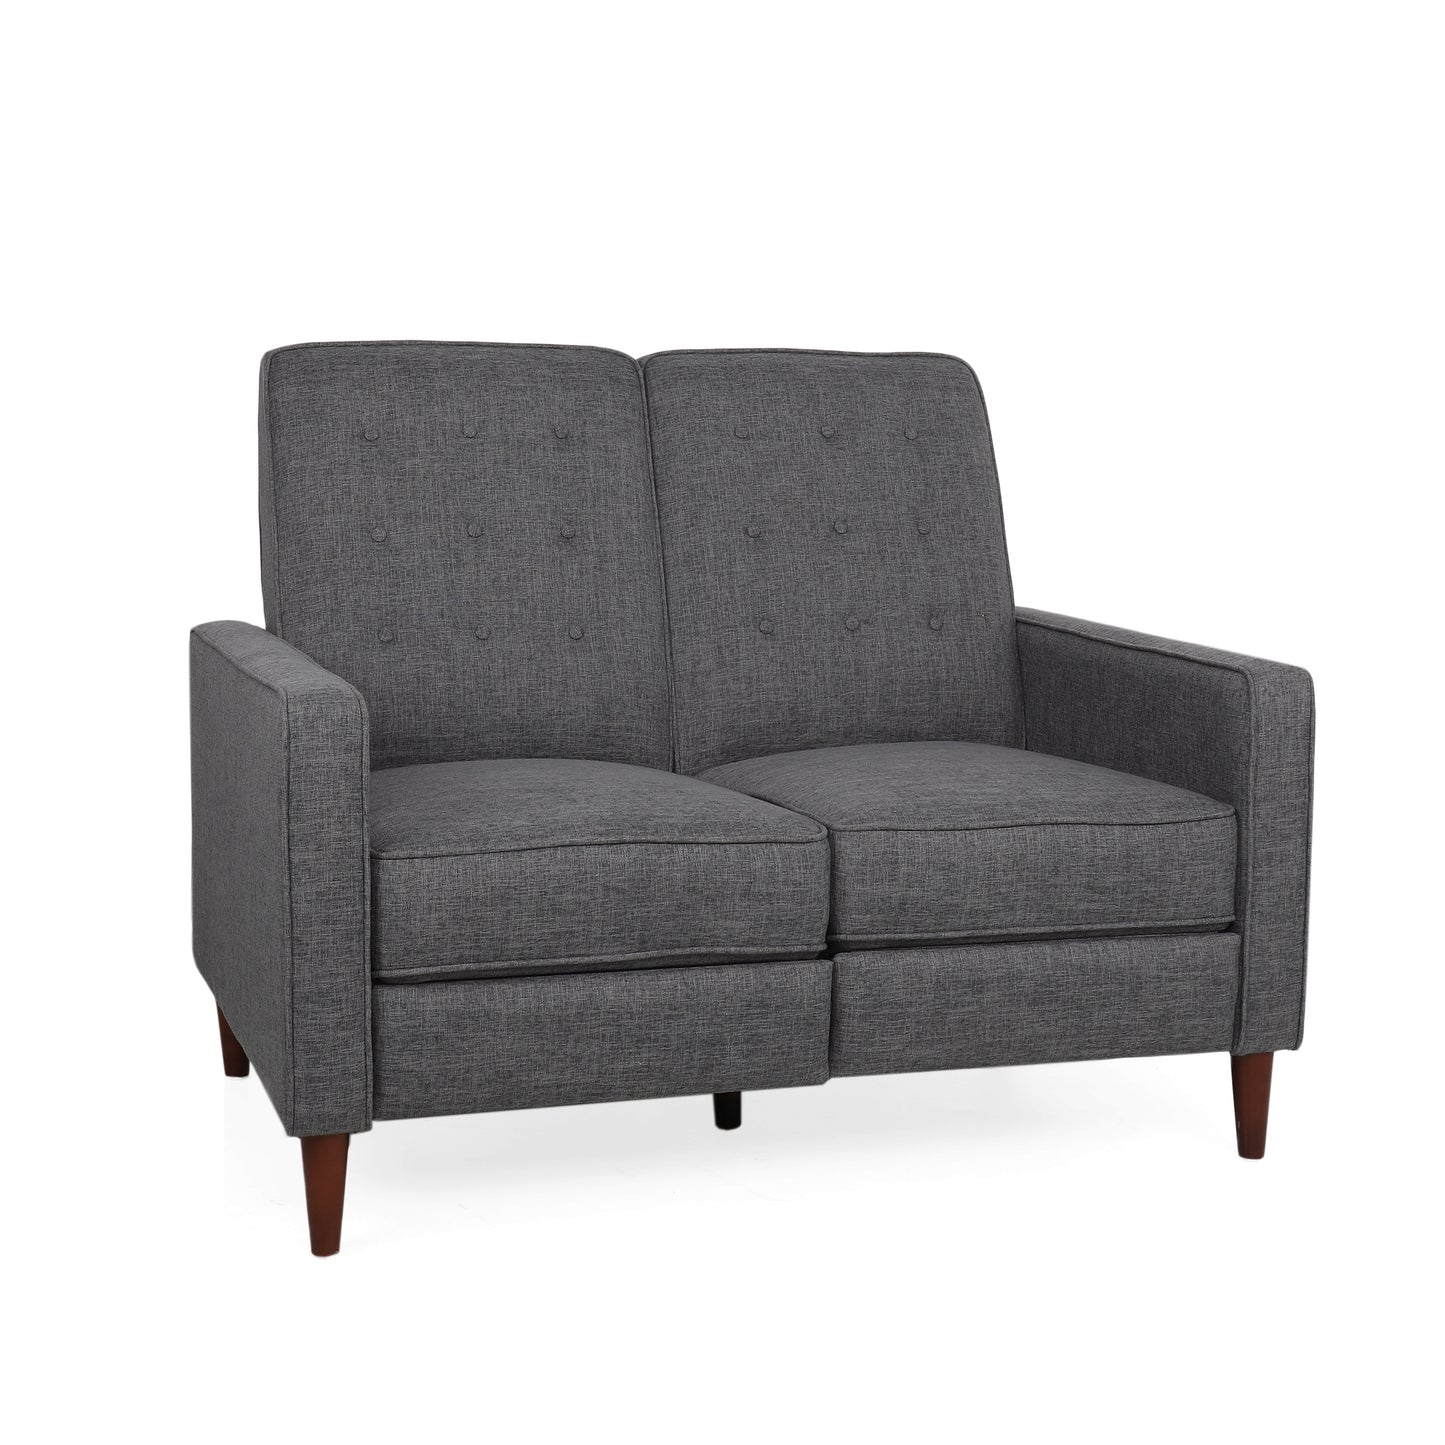 Manville Contemporary Tufted Loveseat Pushback Recliner